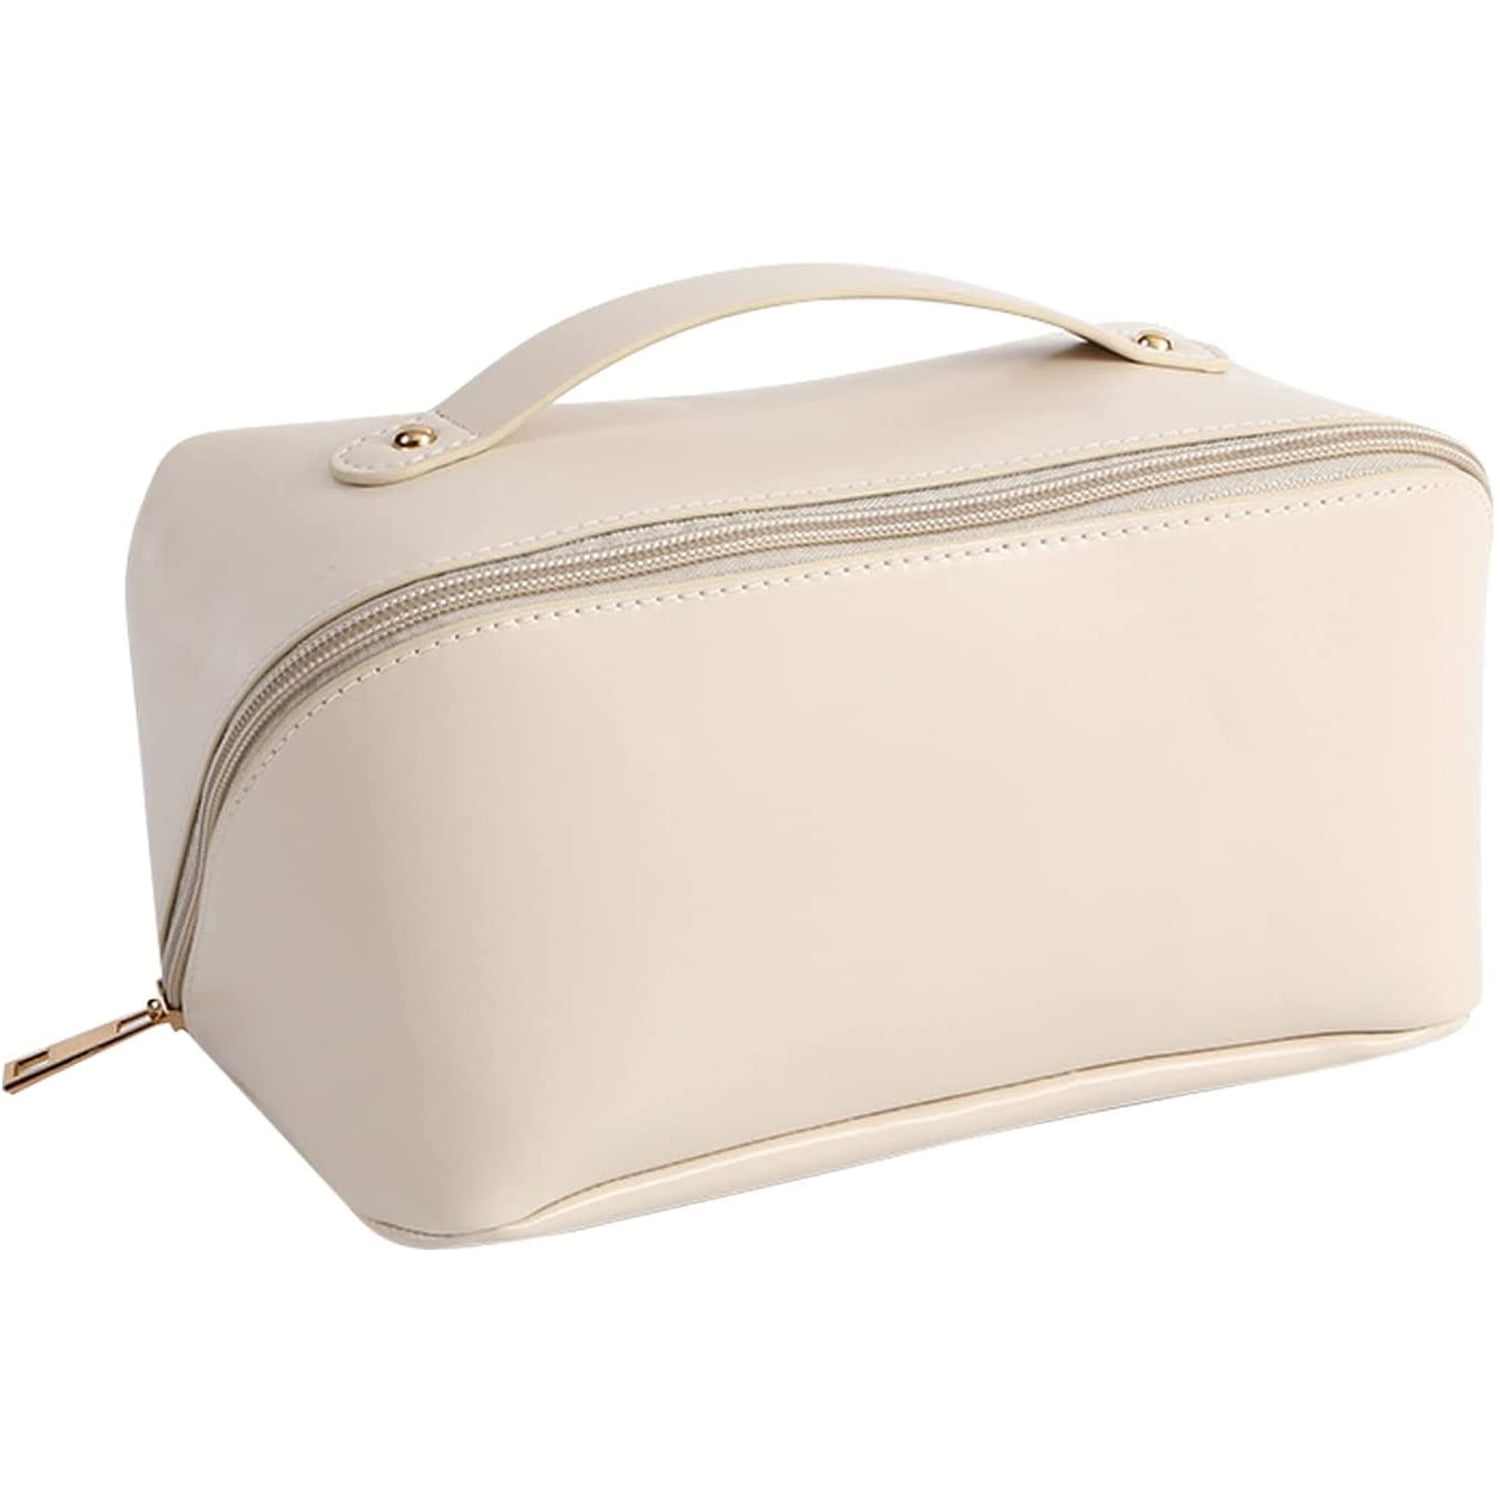 Daisy Rose Cosmetic Toiletry Bag PU Vegan Leather Travel Bag for Women -  Cream Checkered